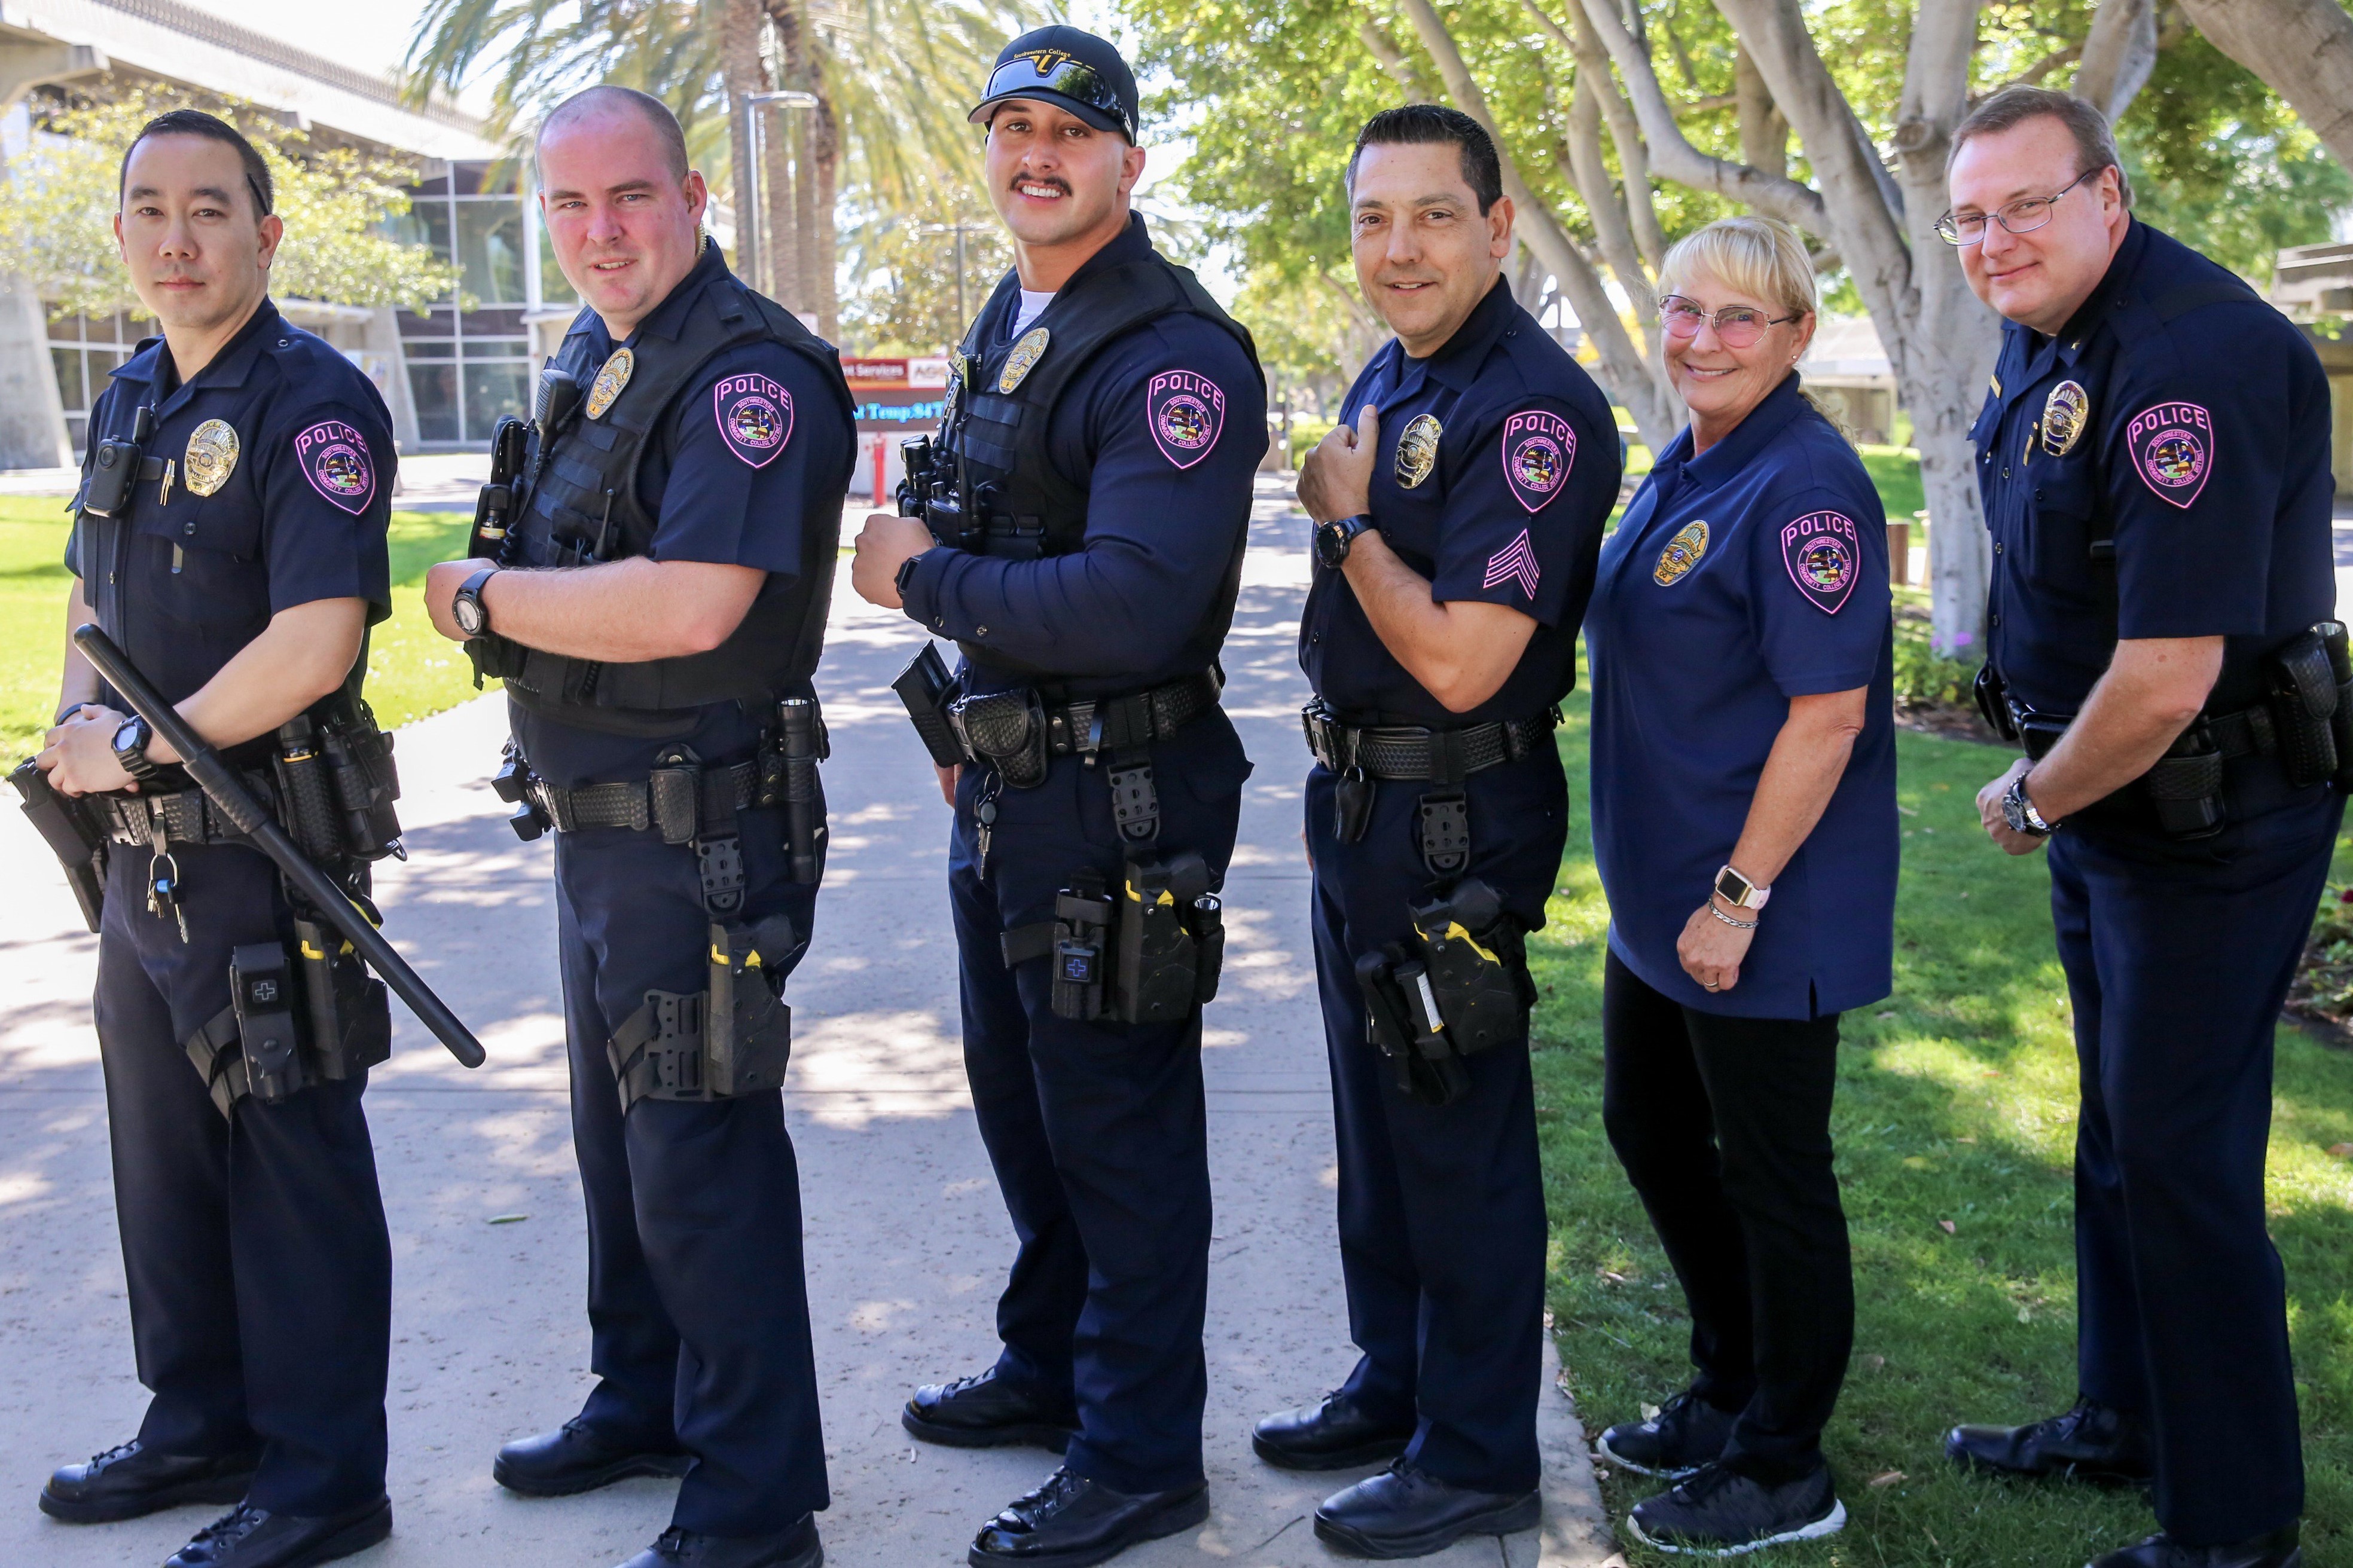 SWCPD showing off their pink badges for Breast Cancer Awareness Month